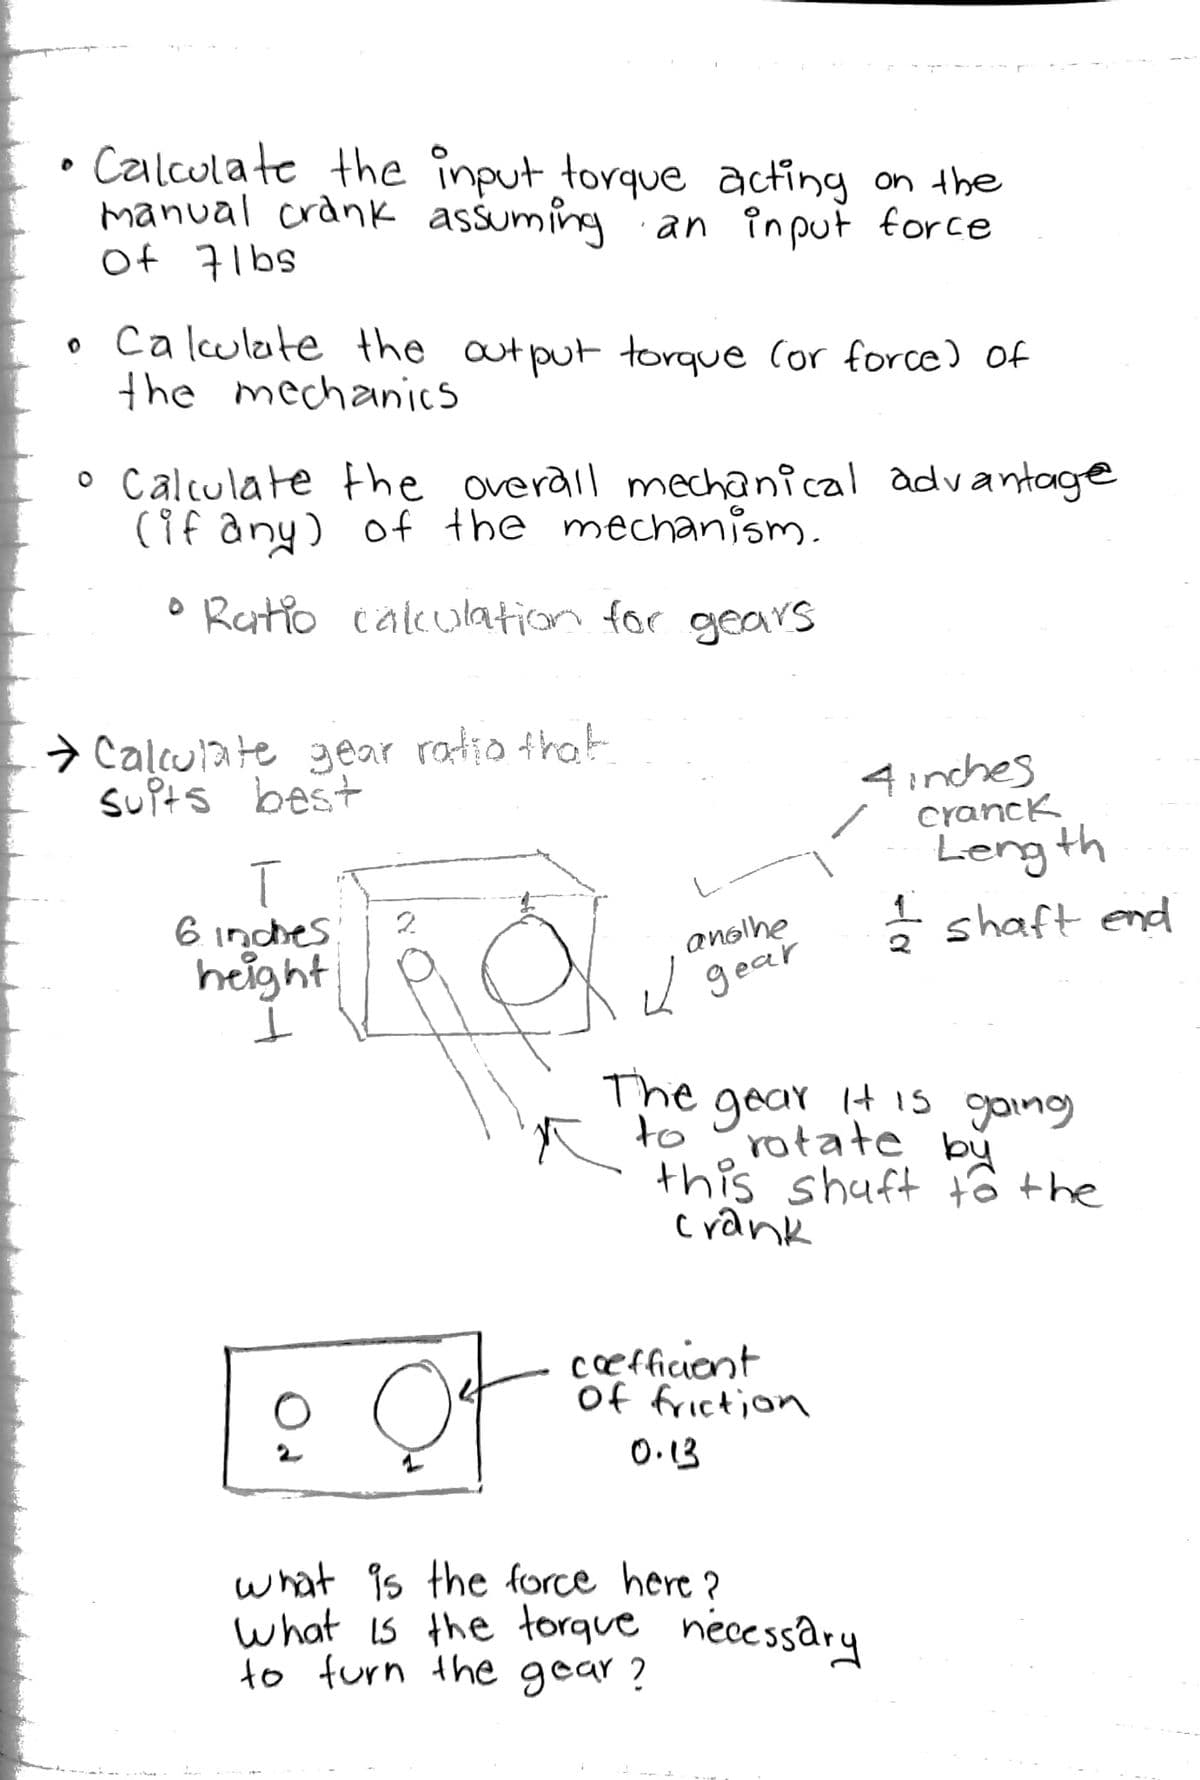 Calculate the înput torque acting on the
manual crank assuming an input force
sqlt to
ca lculate the autputtorque Cor force) of
the mechanics
o Calculate the overail mechanical advantage
(if any) of the mechanism.
o Ratio calculation for gears
> Caļculate 3ear ratio that
suPts best
4inches
cranck
T
6 inches
height
anolhe
gear
Leng th
* shaft end
The gear it is going
to
rotate by
this shuft tô the
crank
cefficiont
of friction
O.13
what is the force here ?
what is the torque necessary
to furn the gear?
